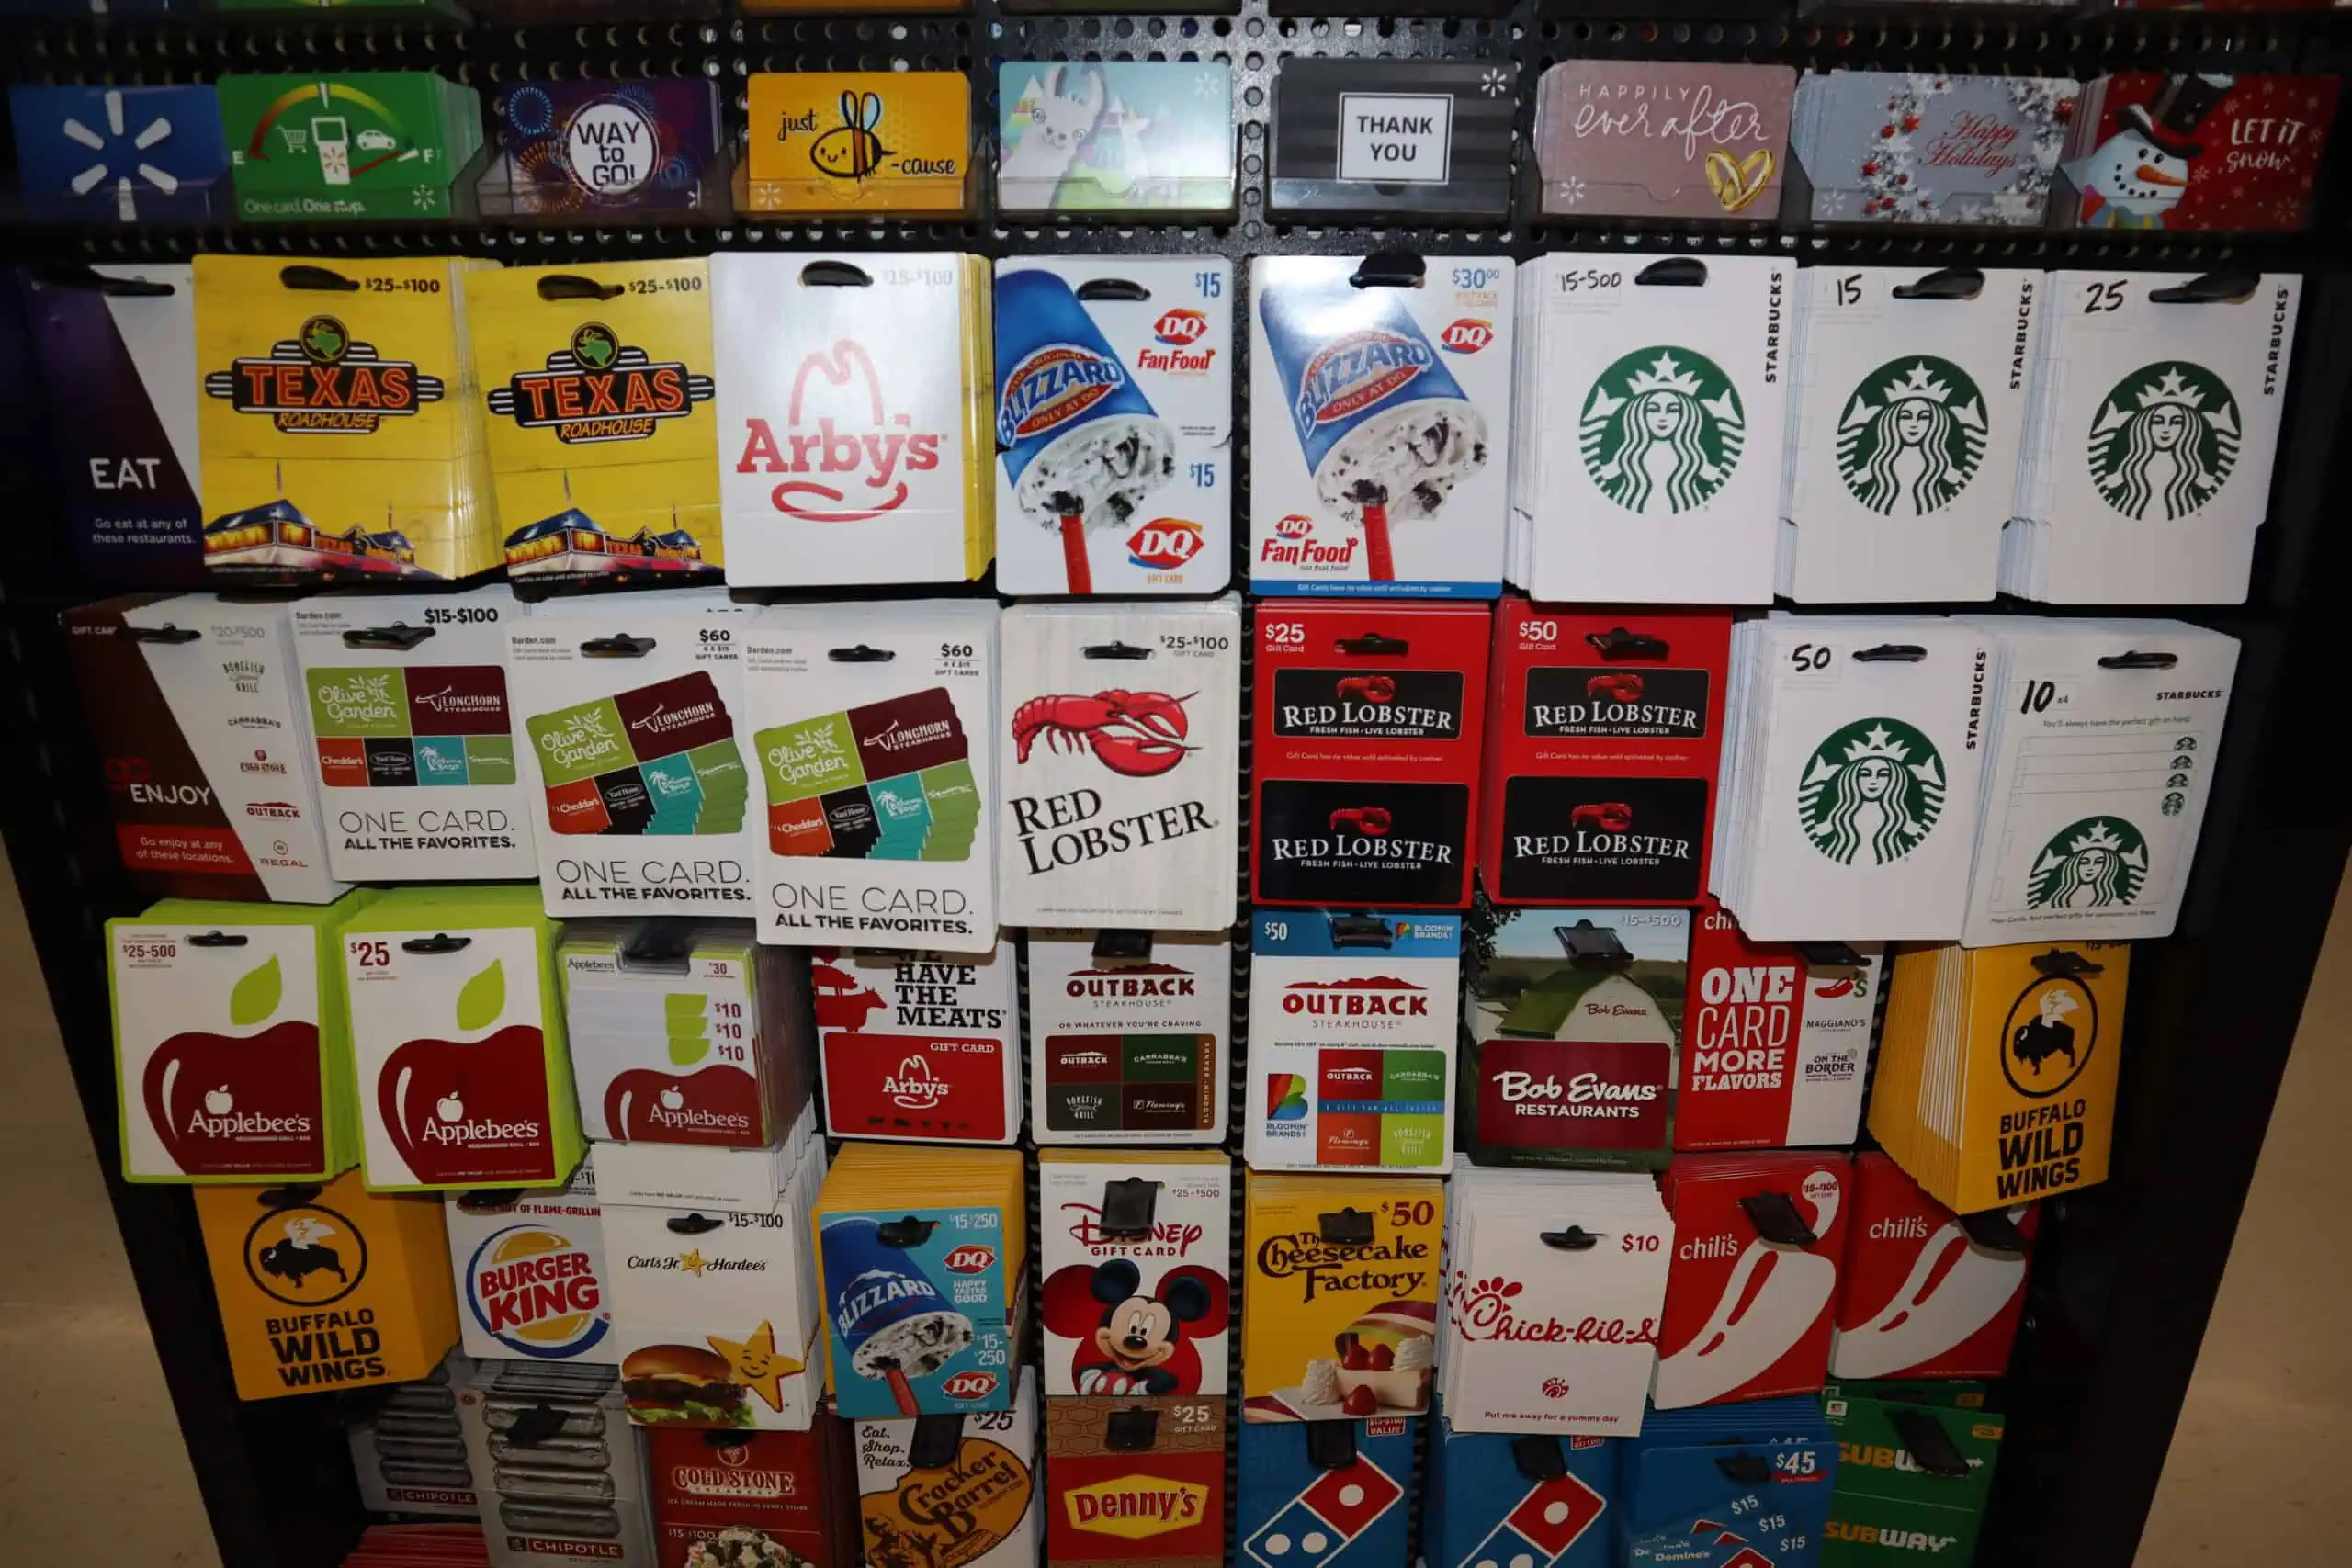 Restaurant Retail Gift Cards scaled